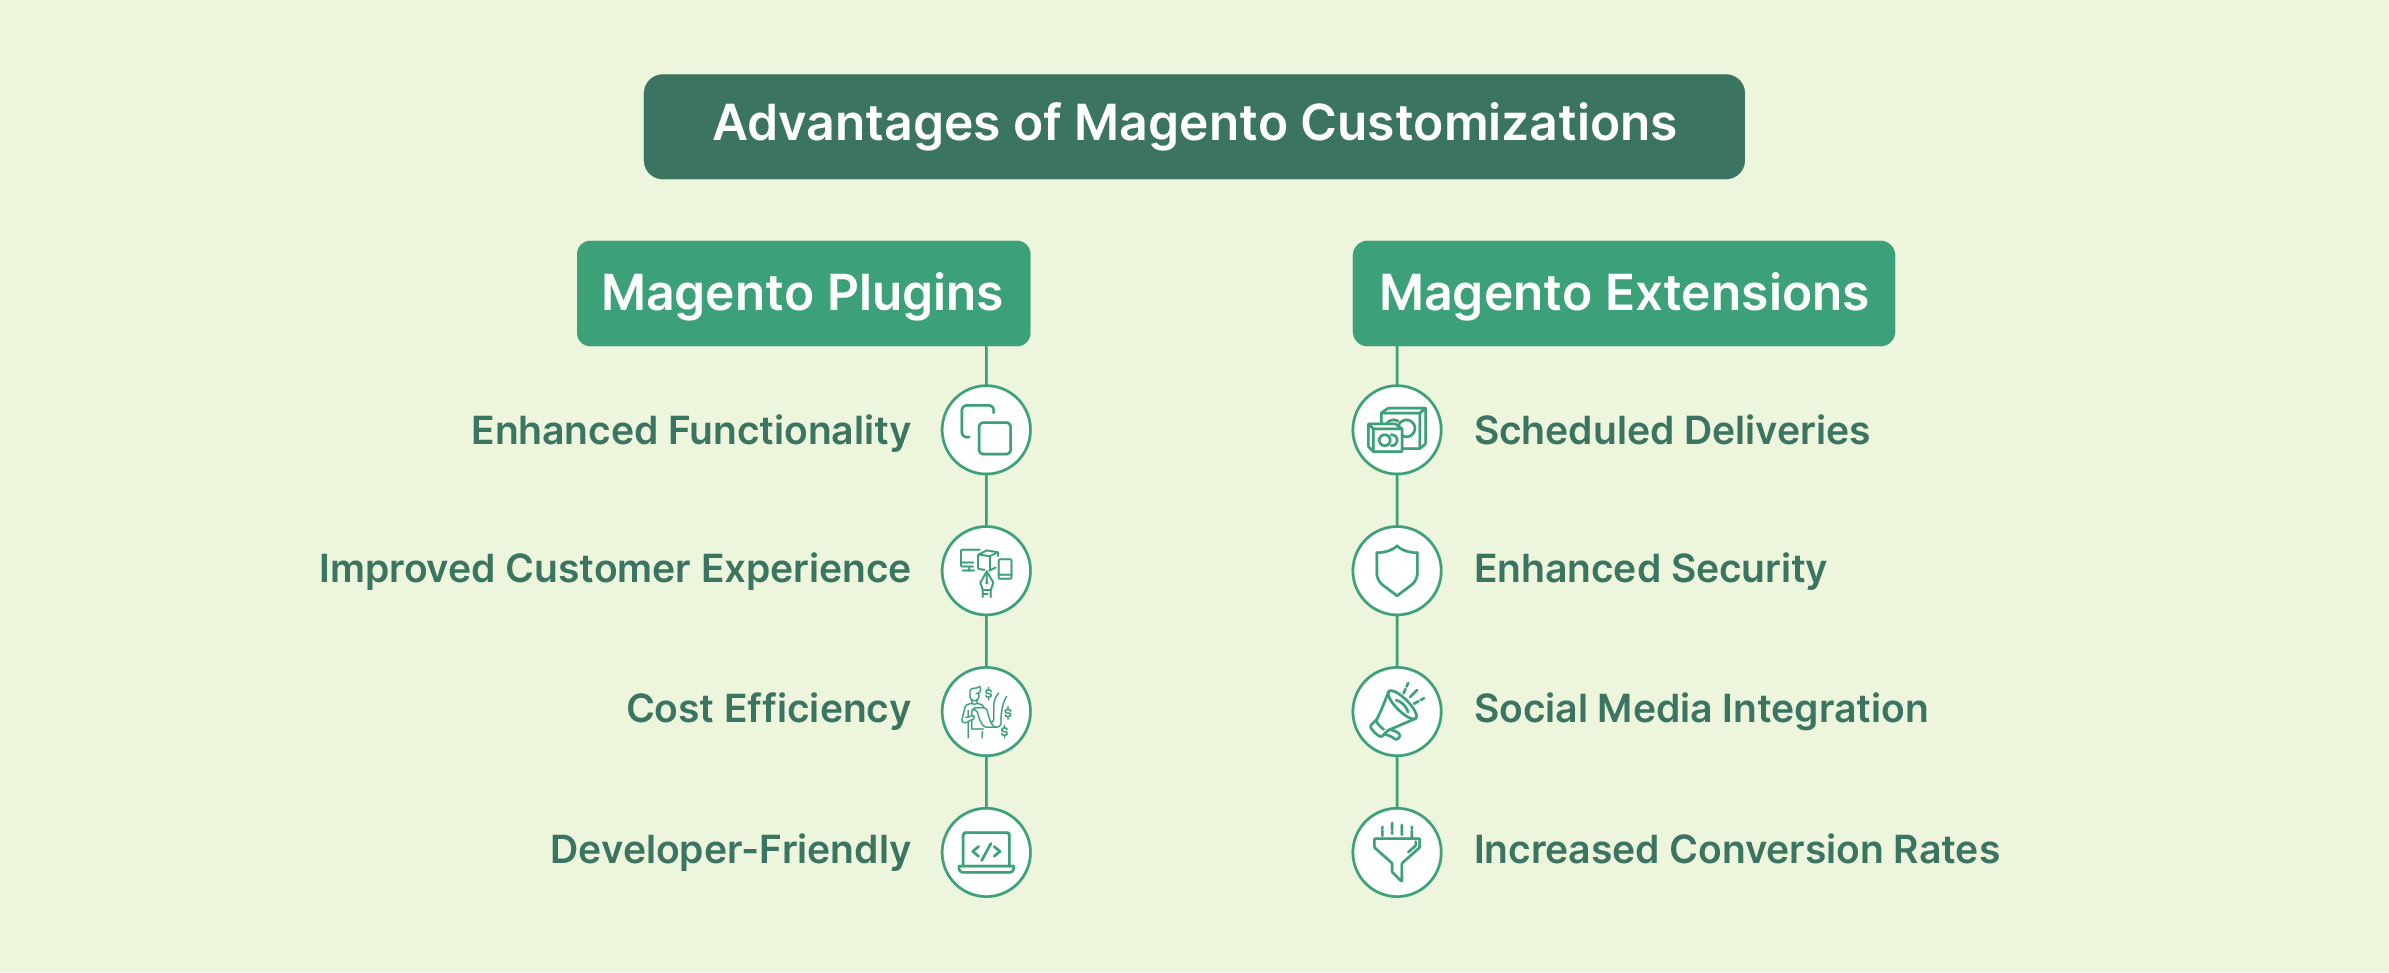 Advantages of Magento plugins and extensions for e-commerce customization